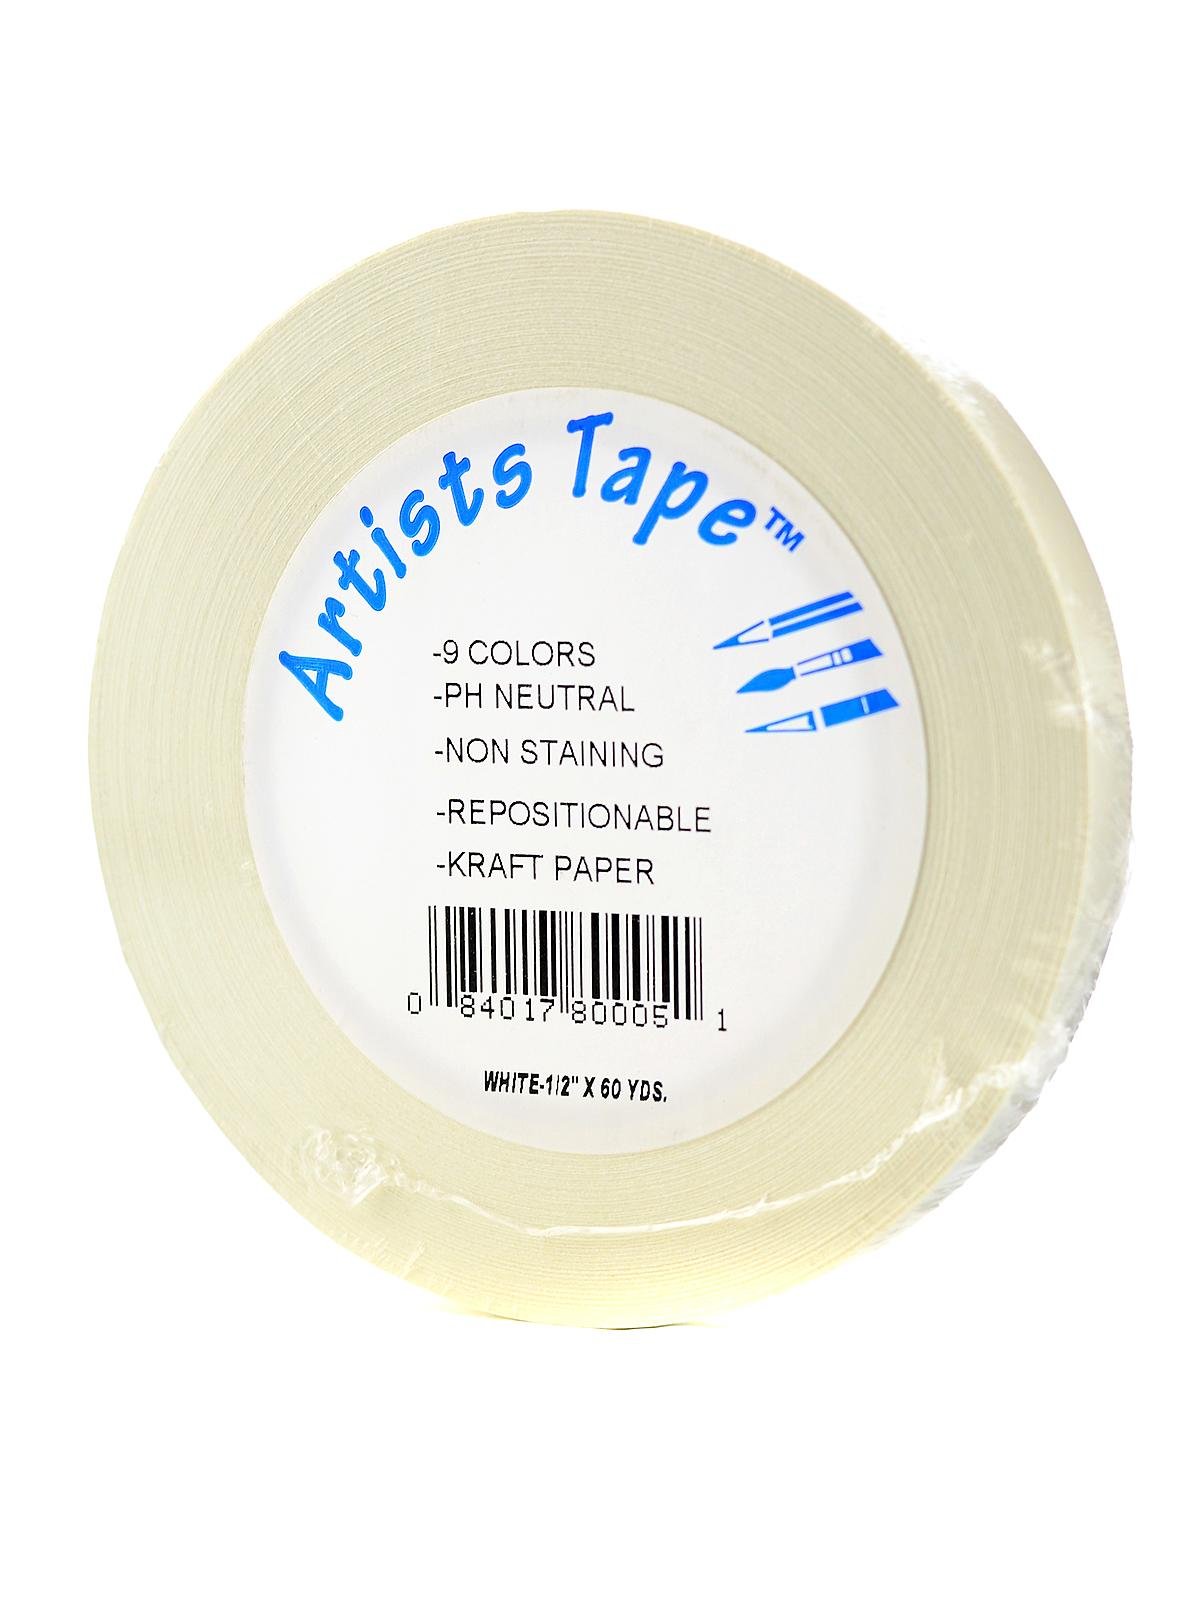 TSSART White Artist Tape Pro - Low Tack Masking Artists Tape for Drafting  Art Watercolor Painting and All Paper Media - Acid Free 1inch Wide 180FT